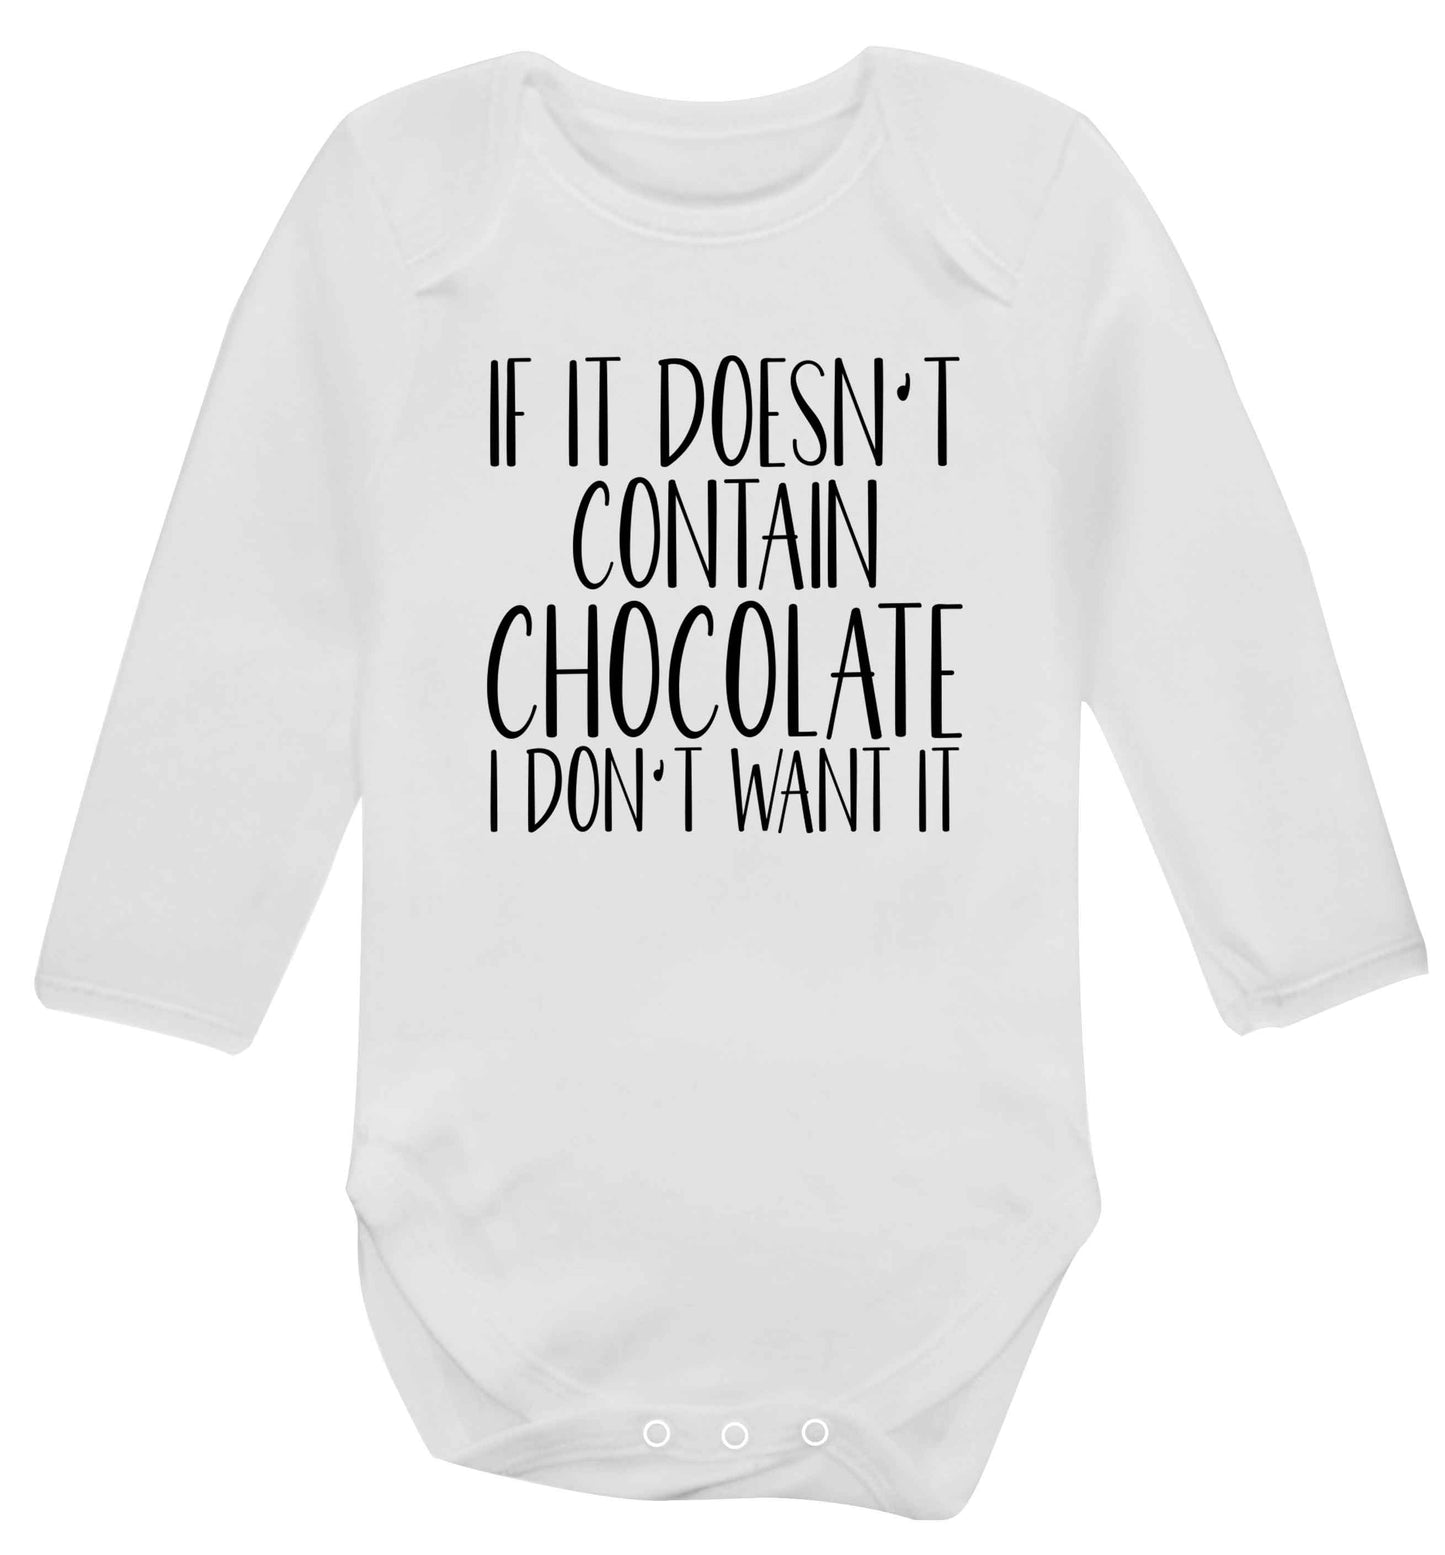 If it doesn't contain chocolate I don't want it baby vest long sleeved white 6-12 months